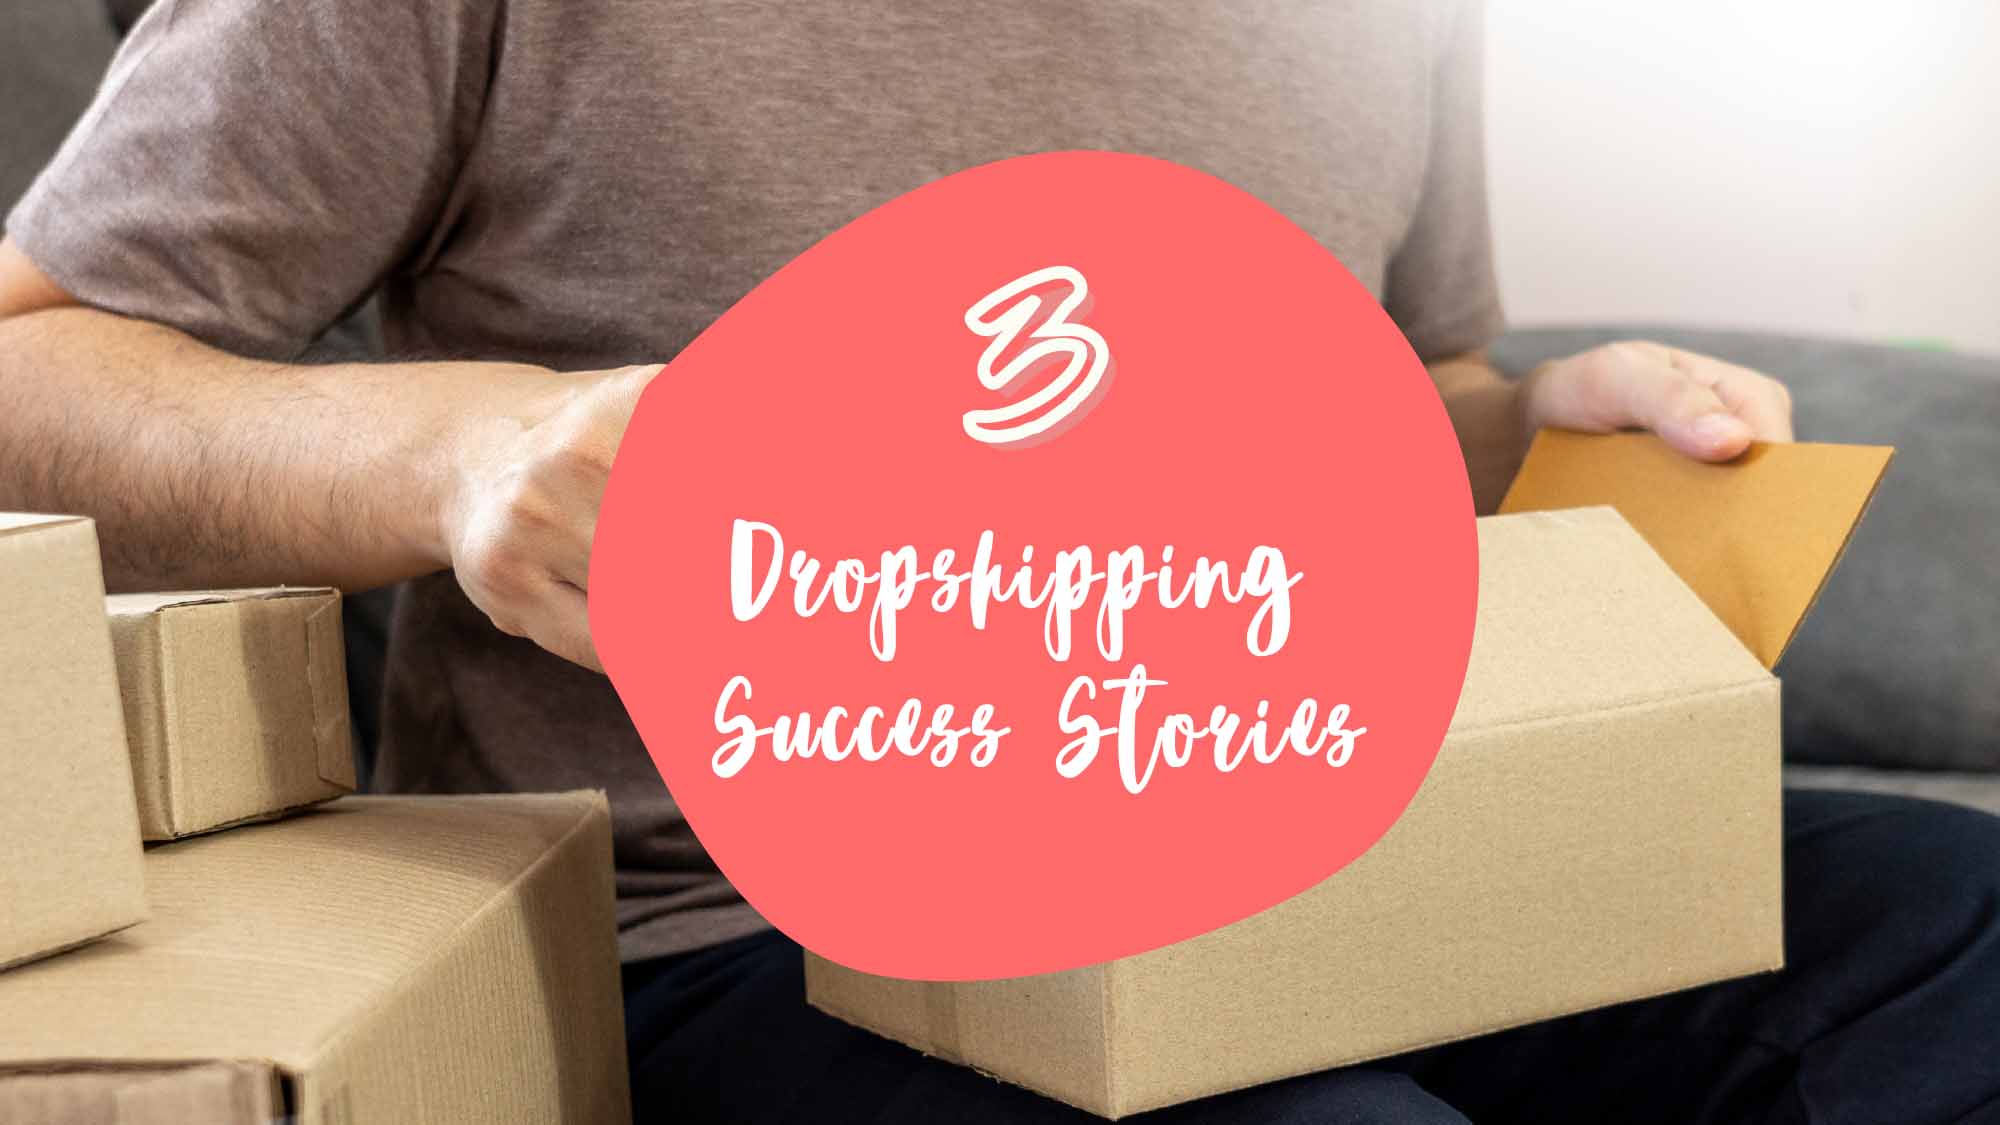 3 Dropshipping Success Stories That Inspires The Dropship Nation